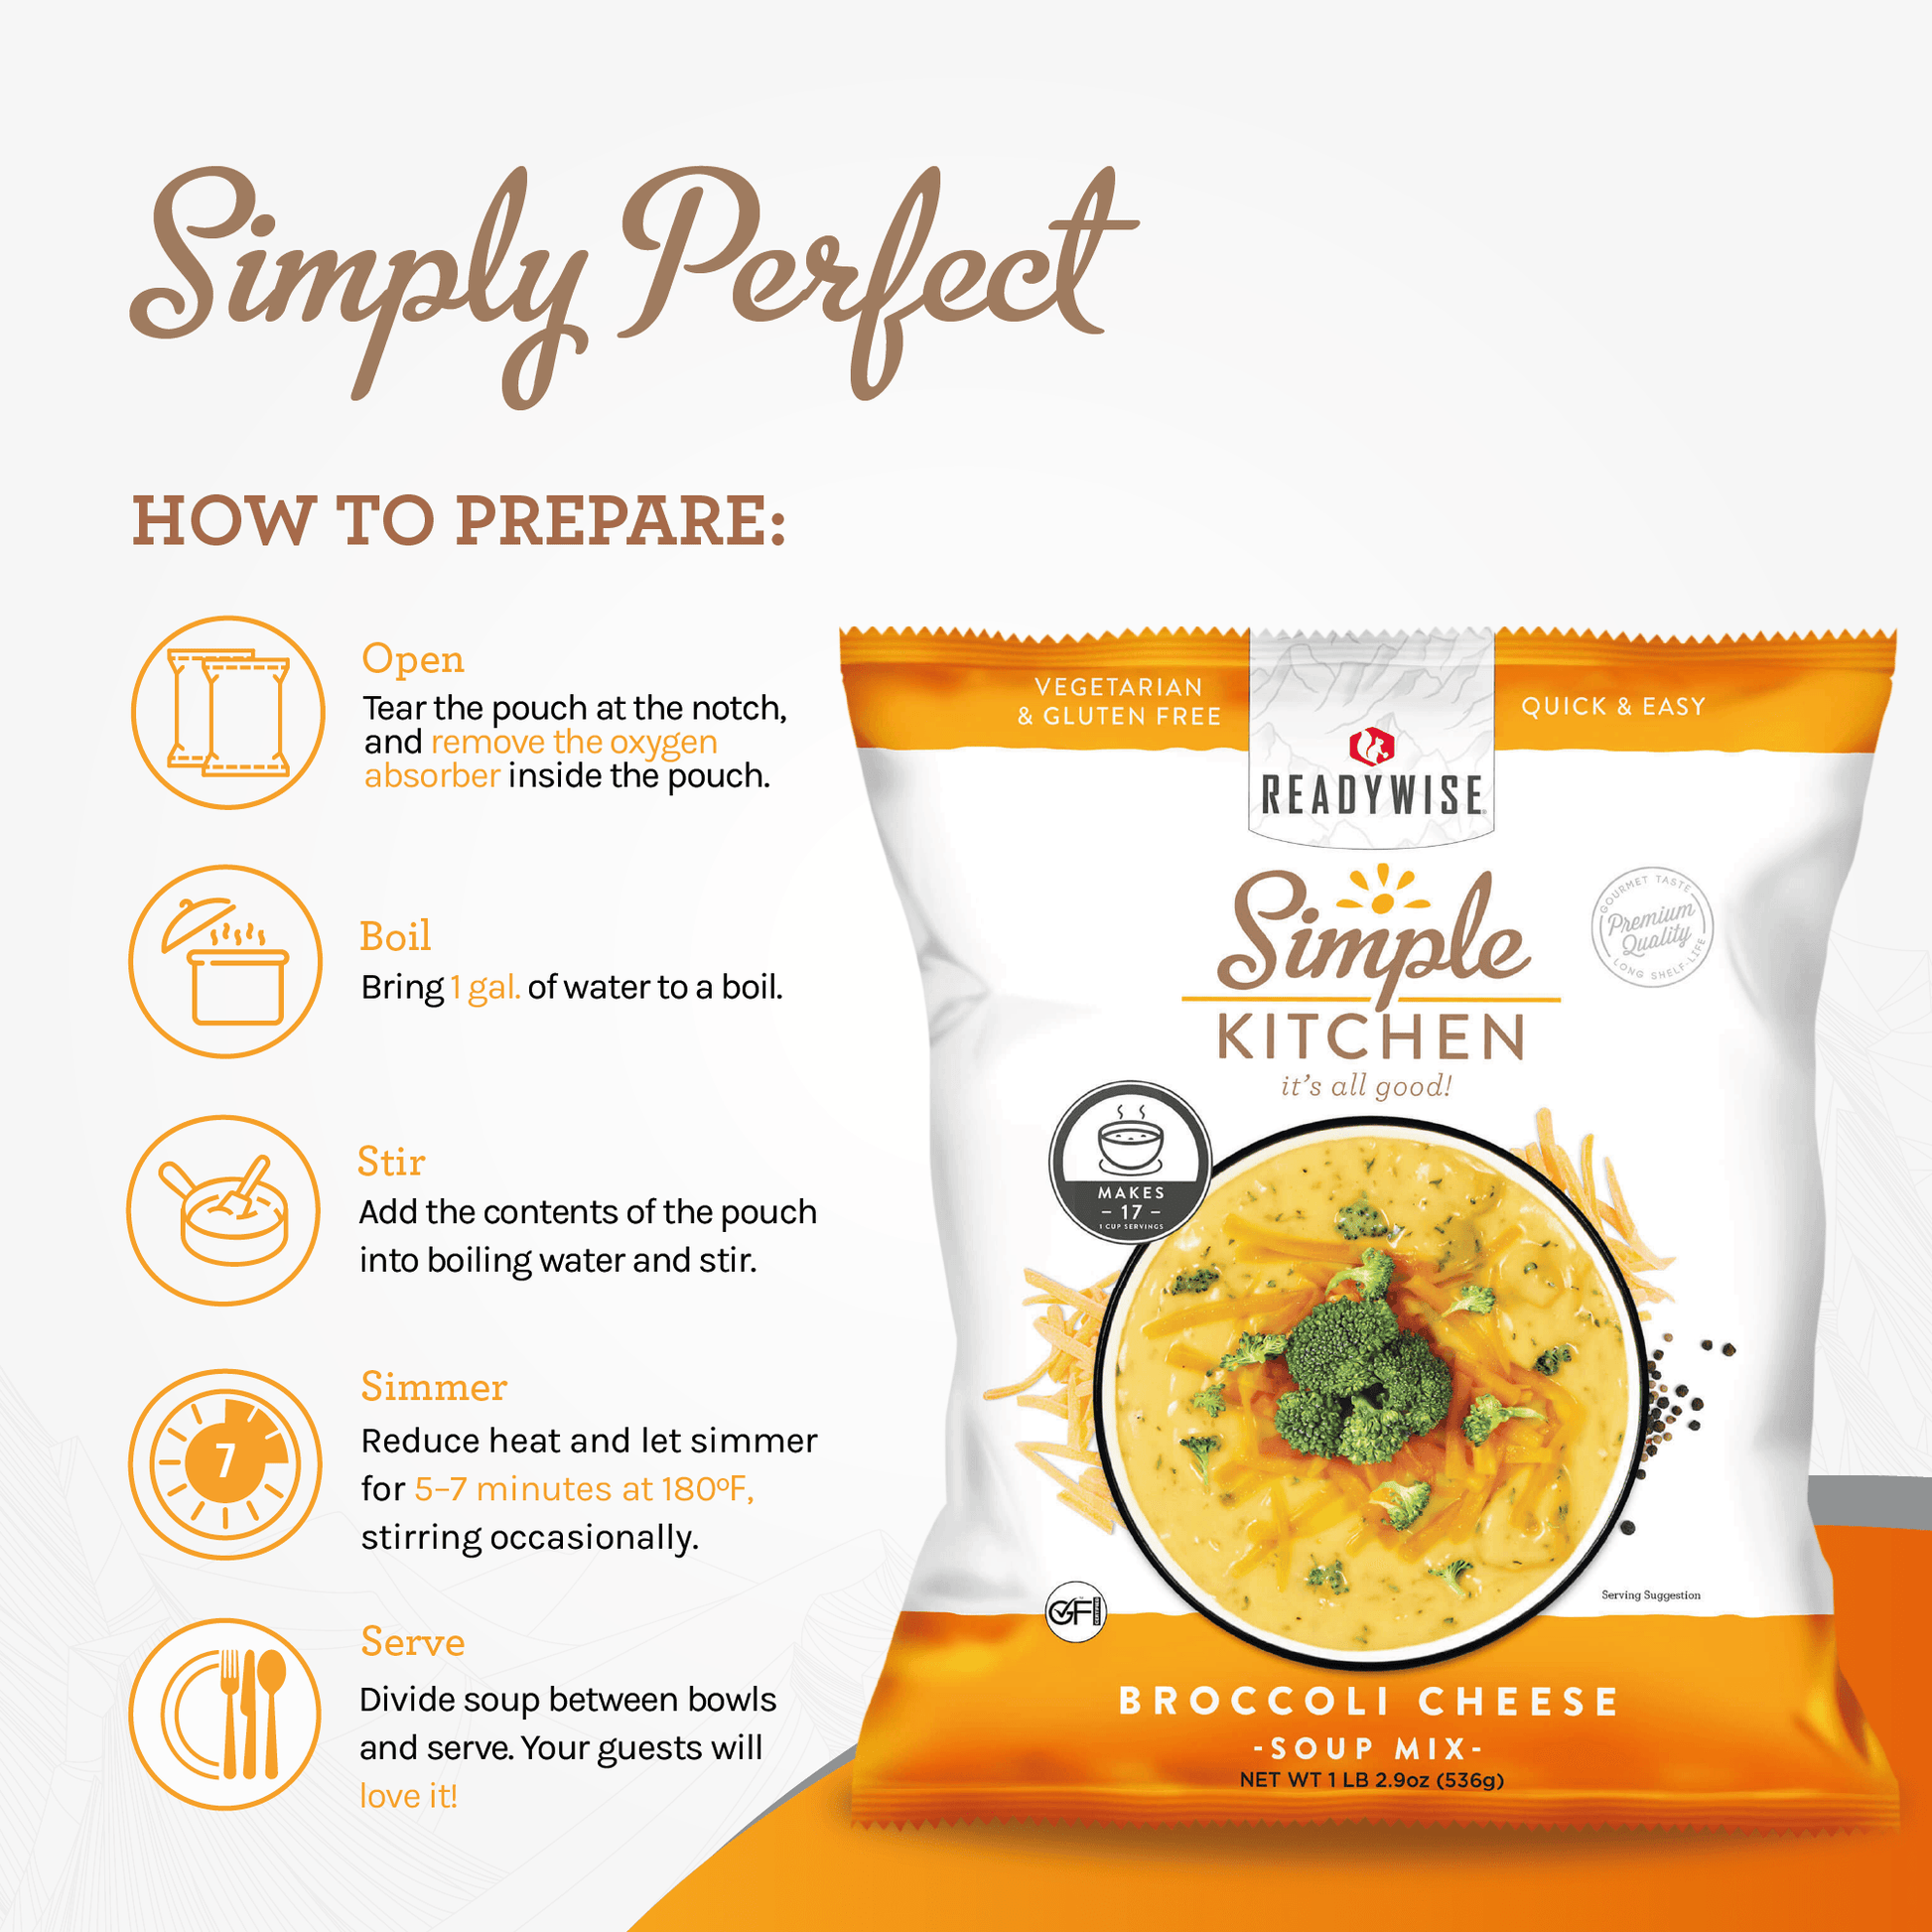 Broccoli Cheese Soup Mix - 17 Servings per Pouch - Simple Kitchen Foods